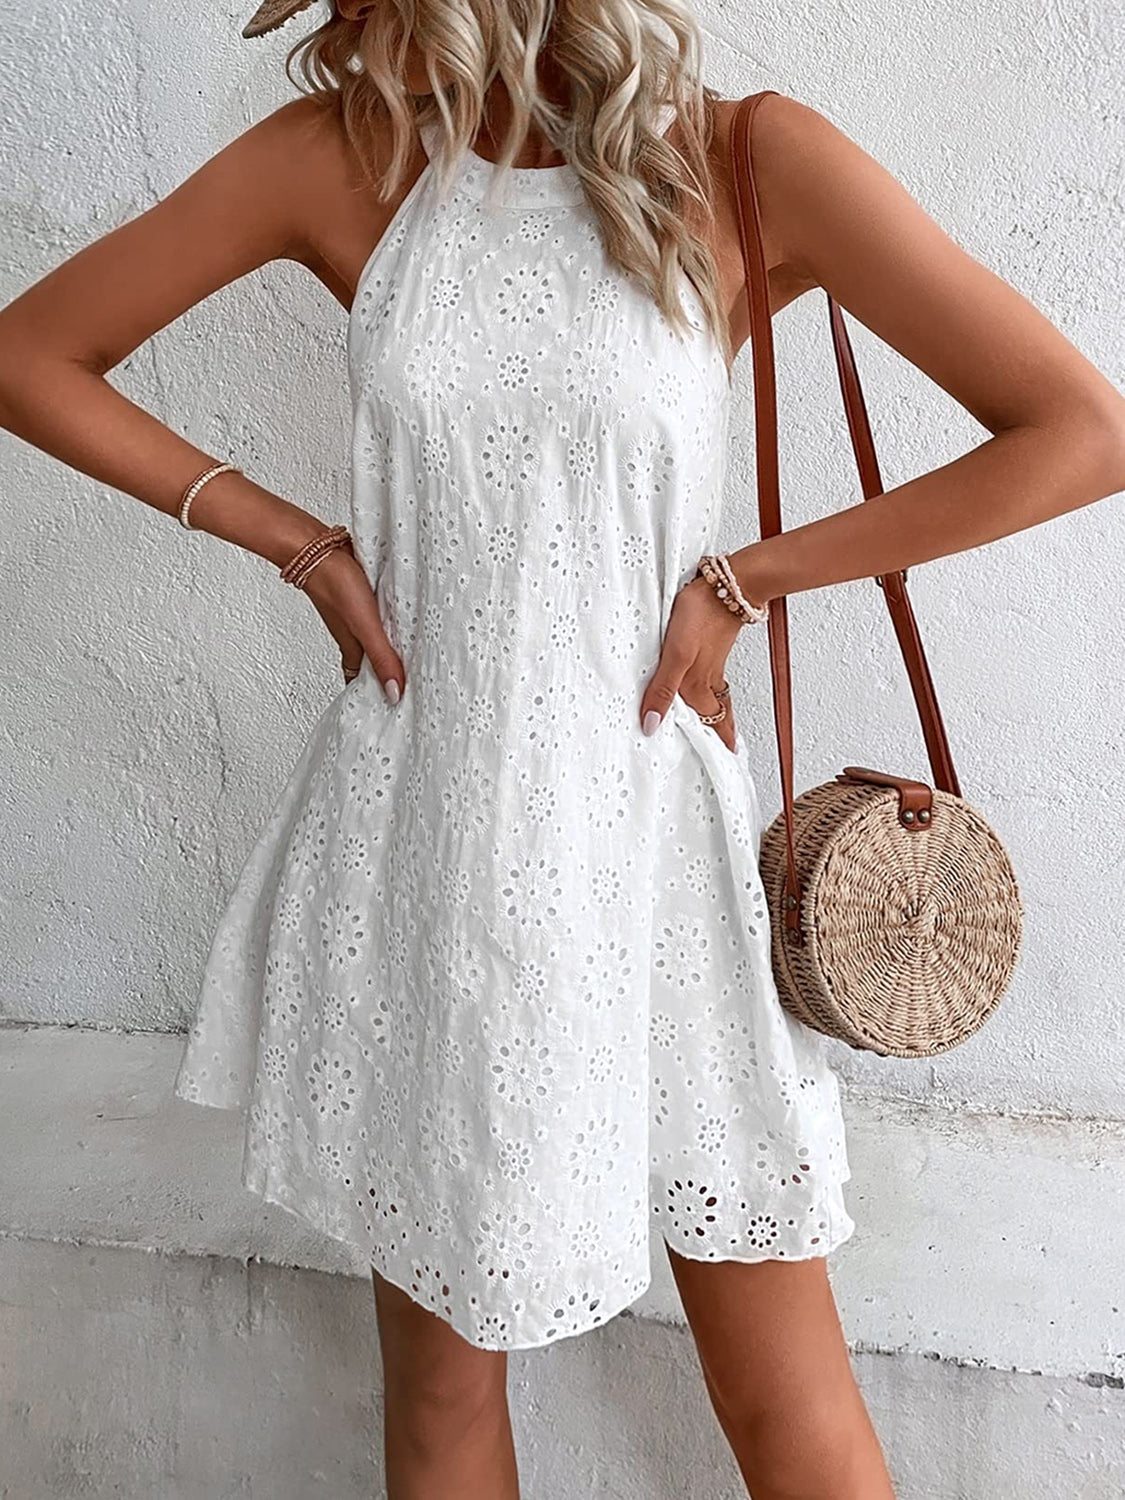 Elevate your wardrobe with the Eyelet Grecian Neck Mini Dress - perfect for any occasion with a timeless design and comfortable fit.